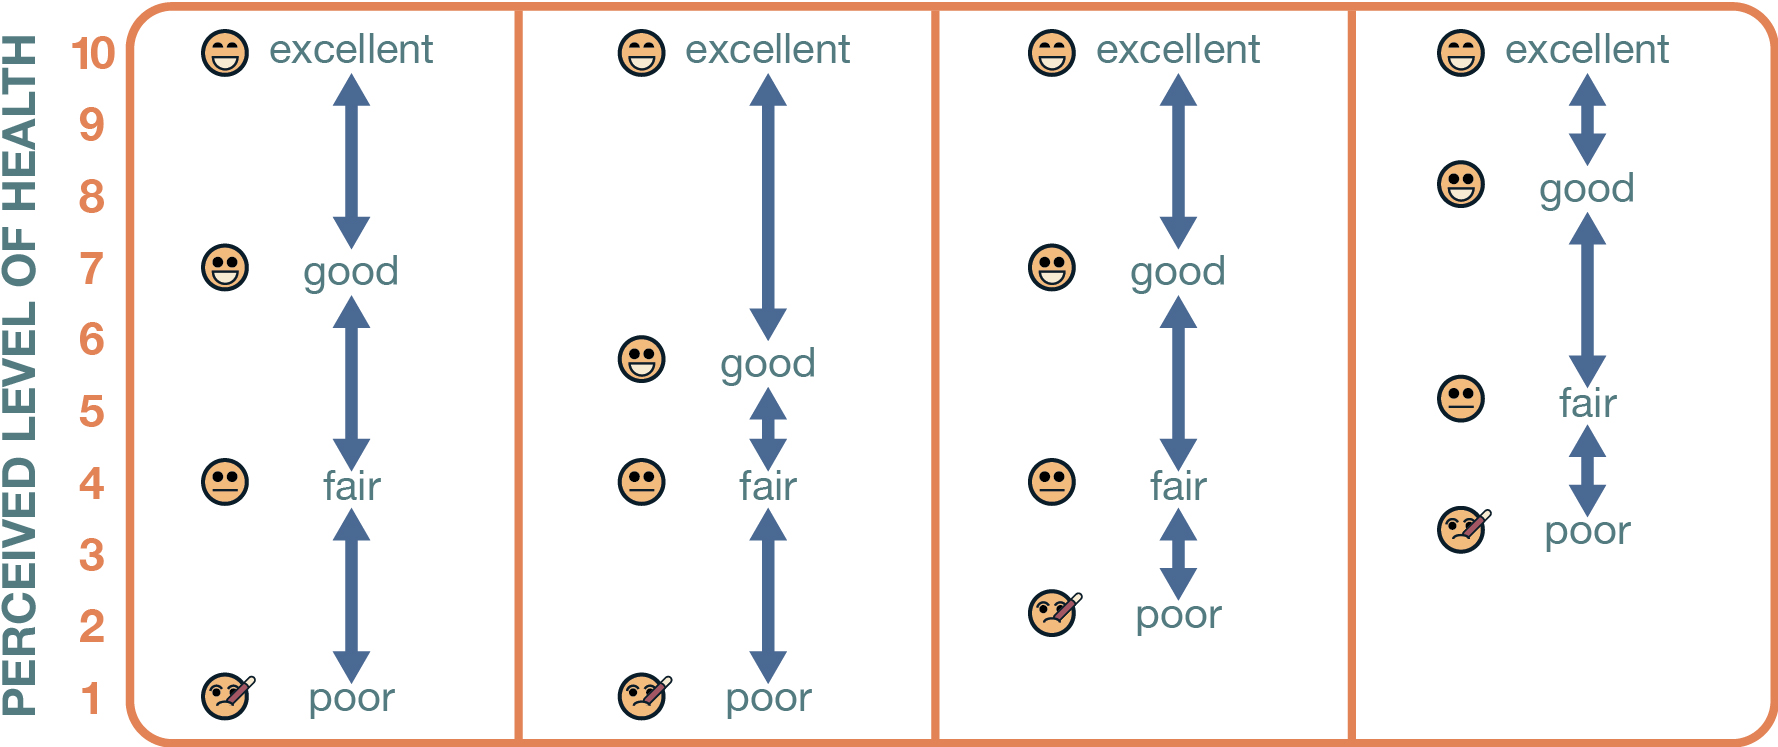 Figure depicting four spectrums of perceived health, with the ranks of excellent, good, fair, and poor set apart at varying differences within each spectrum.